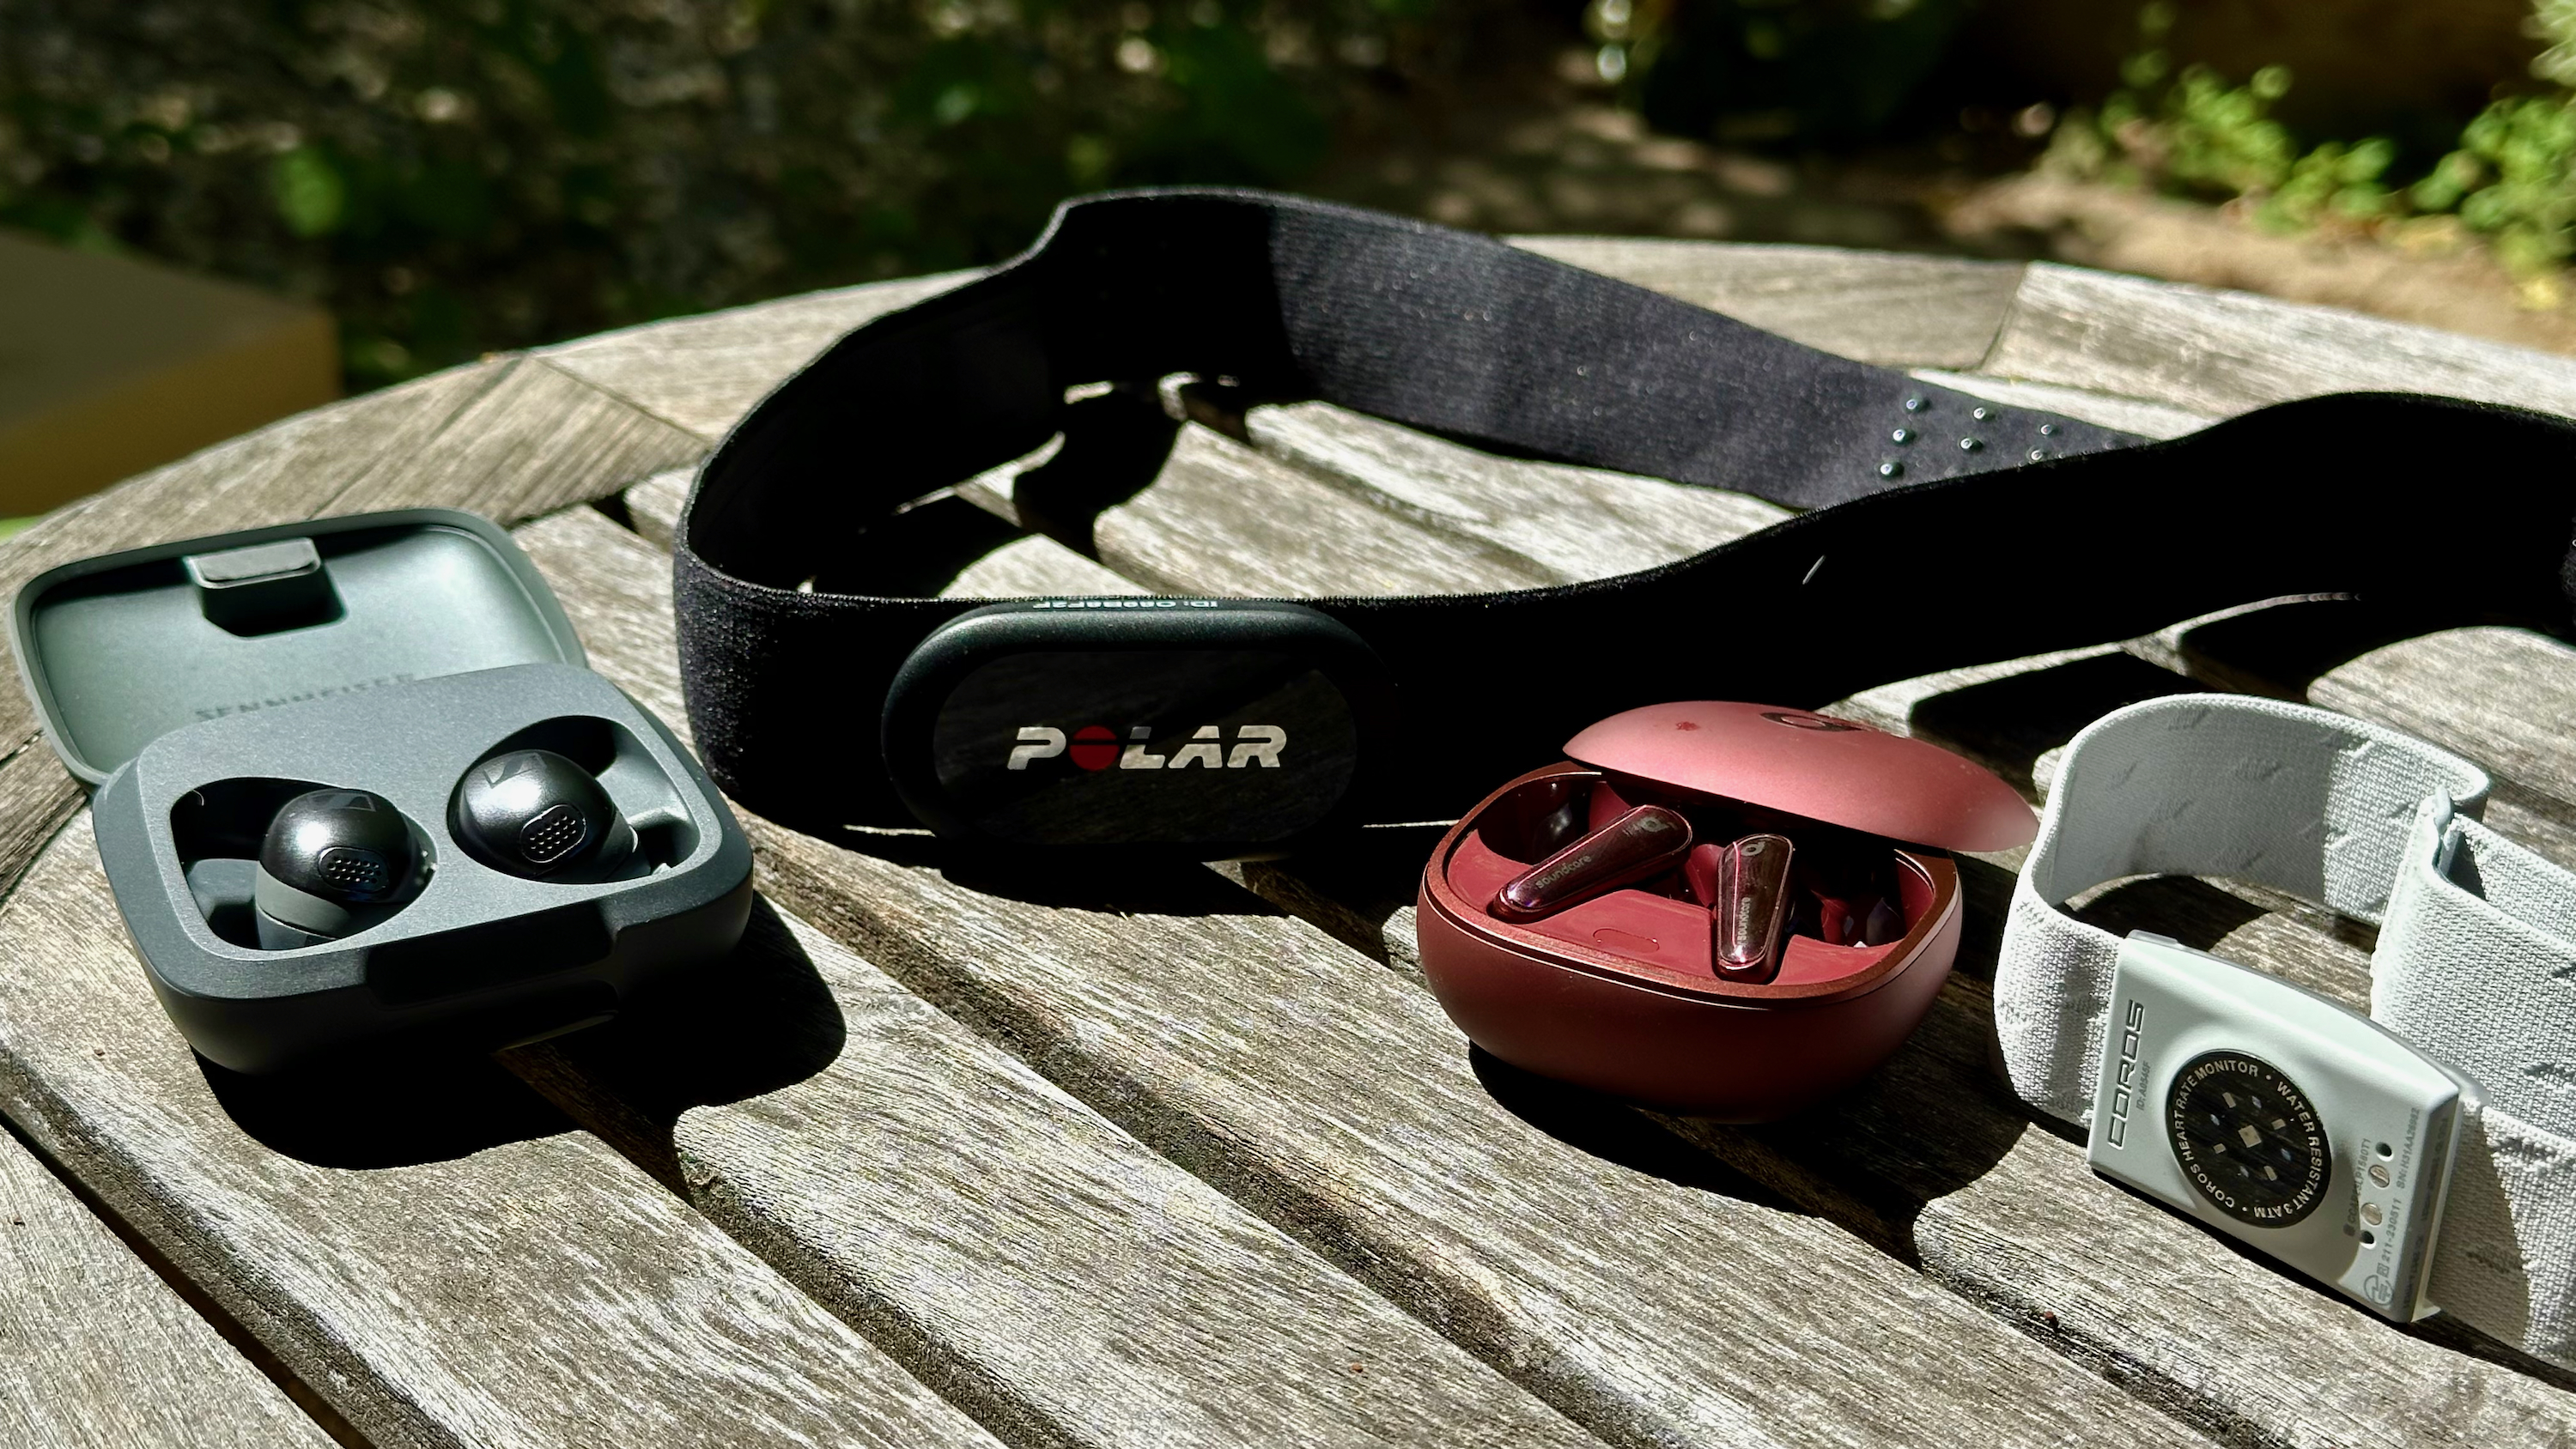 The Polar H10 and COROS heart rate monitor on a table next to two heart rate headphones, Sennheiser Momentum Sport and Anker Soundcore Liberty 4.